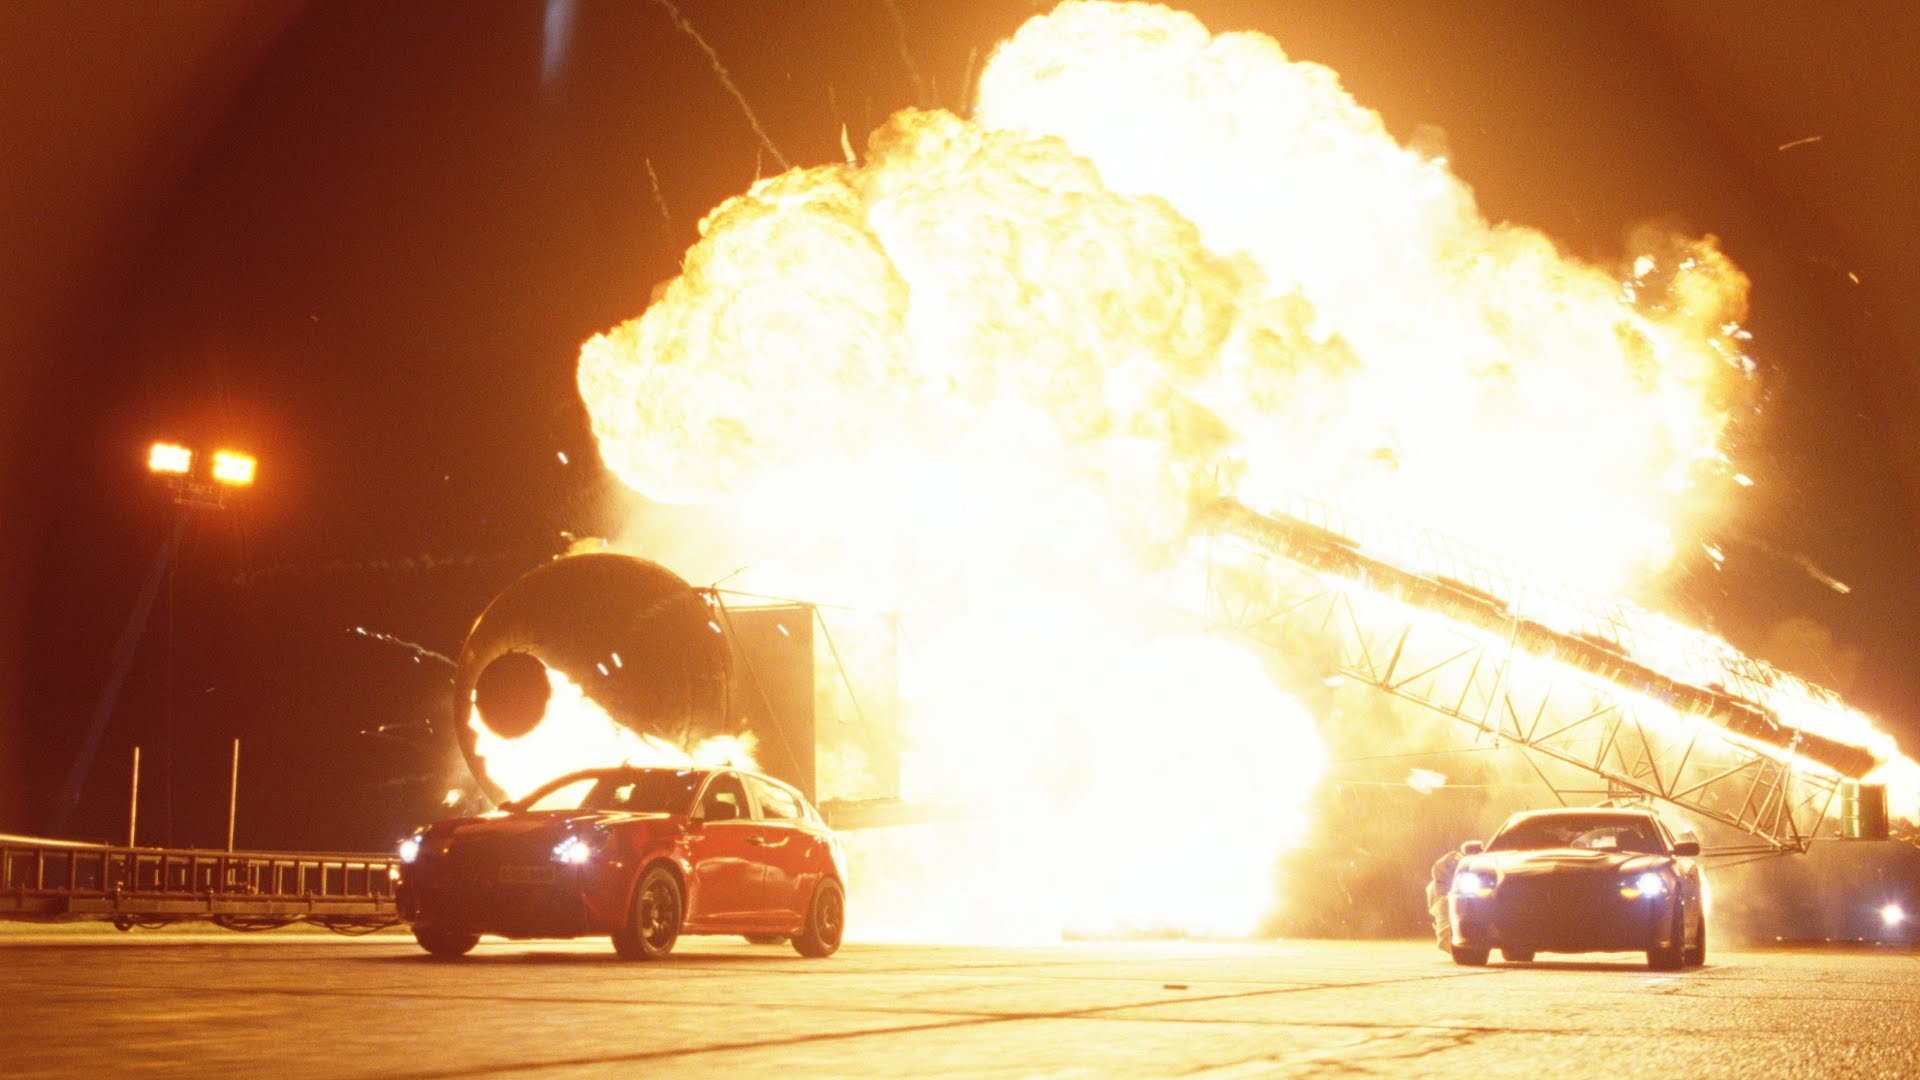 THE 'FAST 8' TEAM IS CURRENTLY BLOWING STUFF UP – Action A 